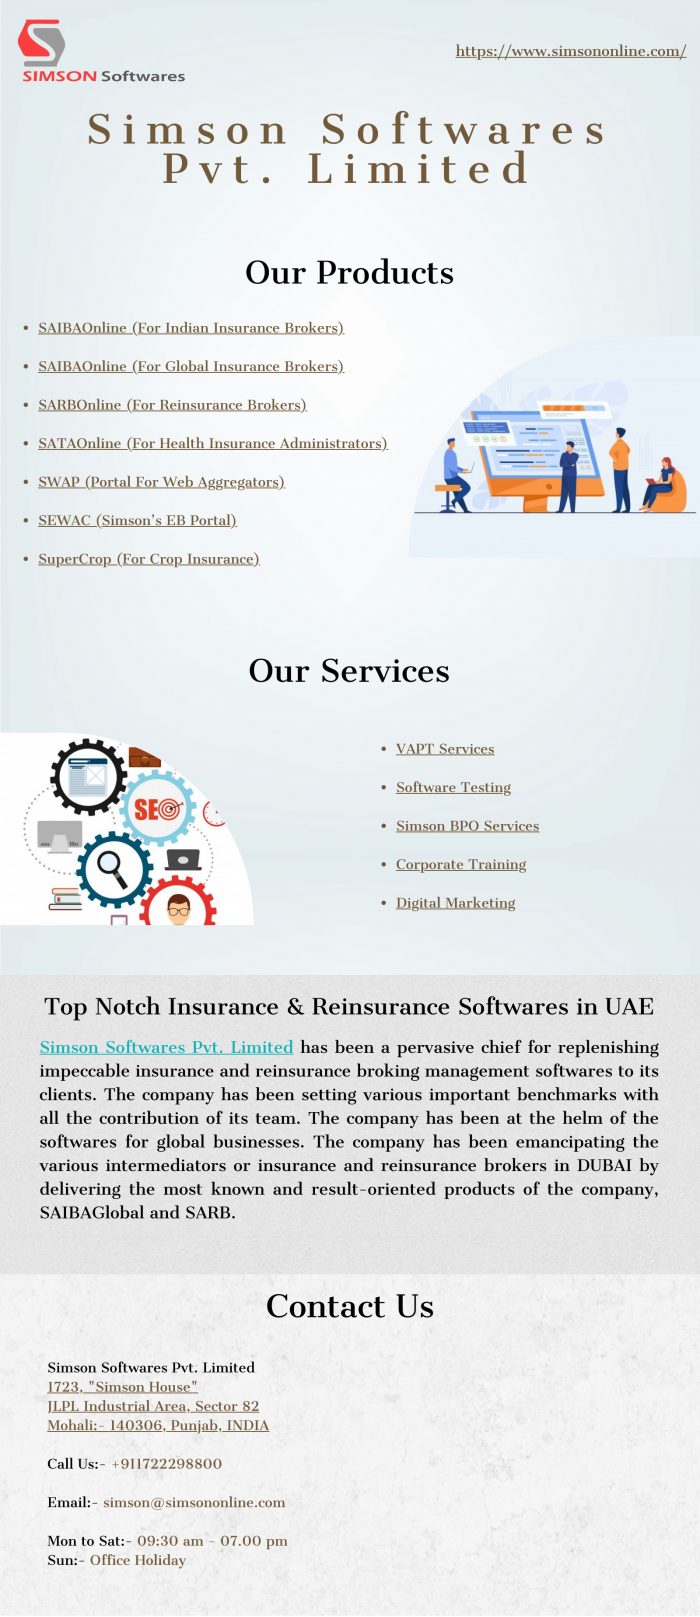 Simson Softwares Provides Softwares for Insurance/Reinsurance Brokers to Improve Operational Eff ...